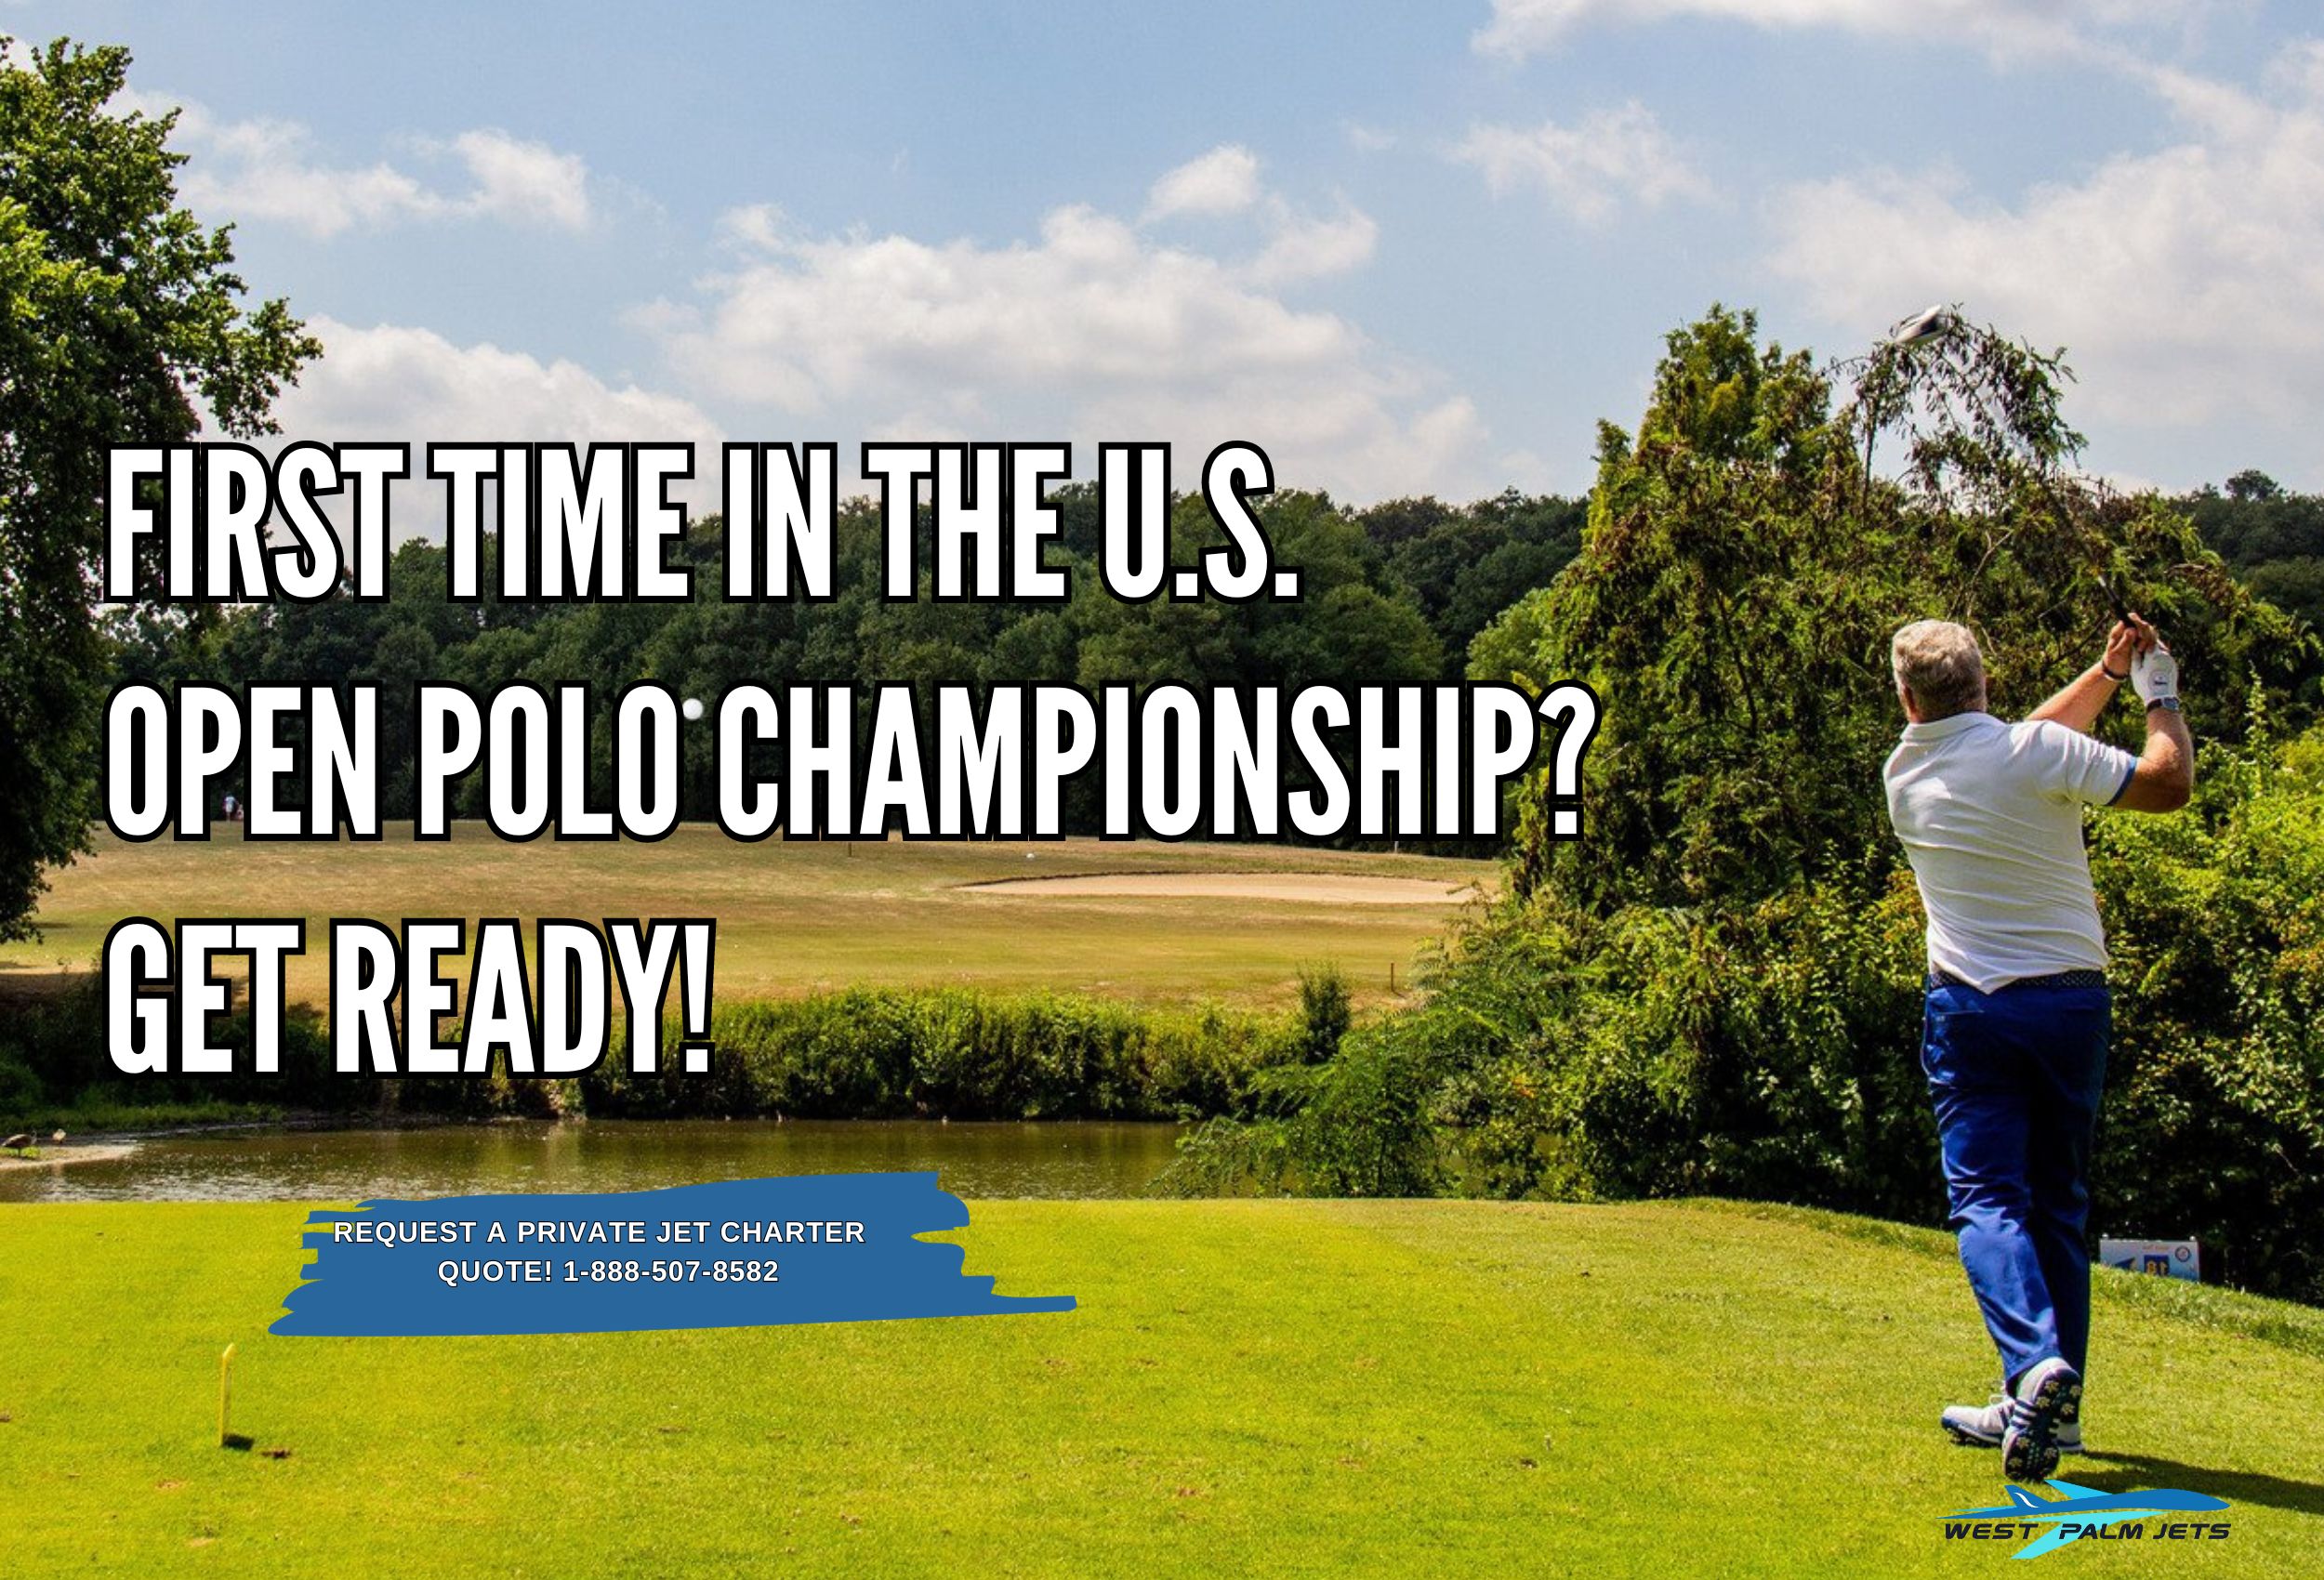 First Time In The U.S. Open Polo Championship Get Ready! (1)